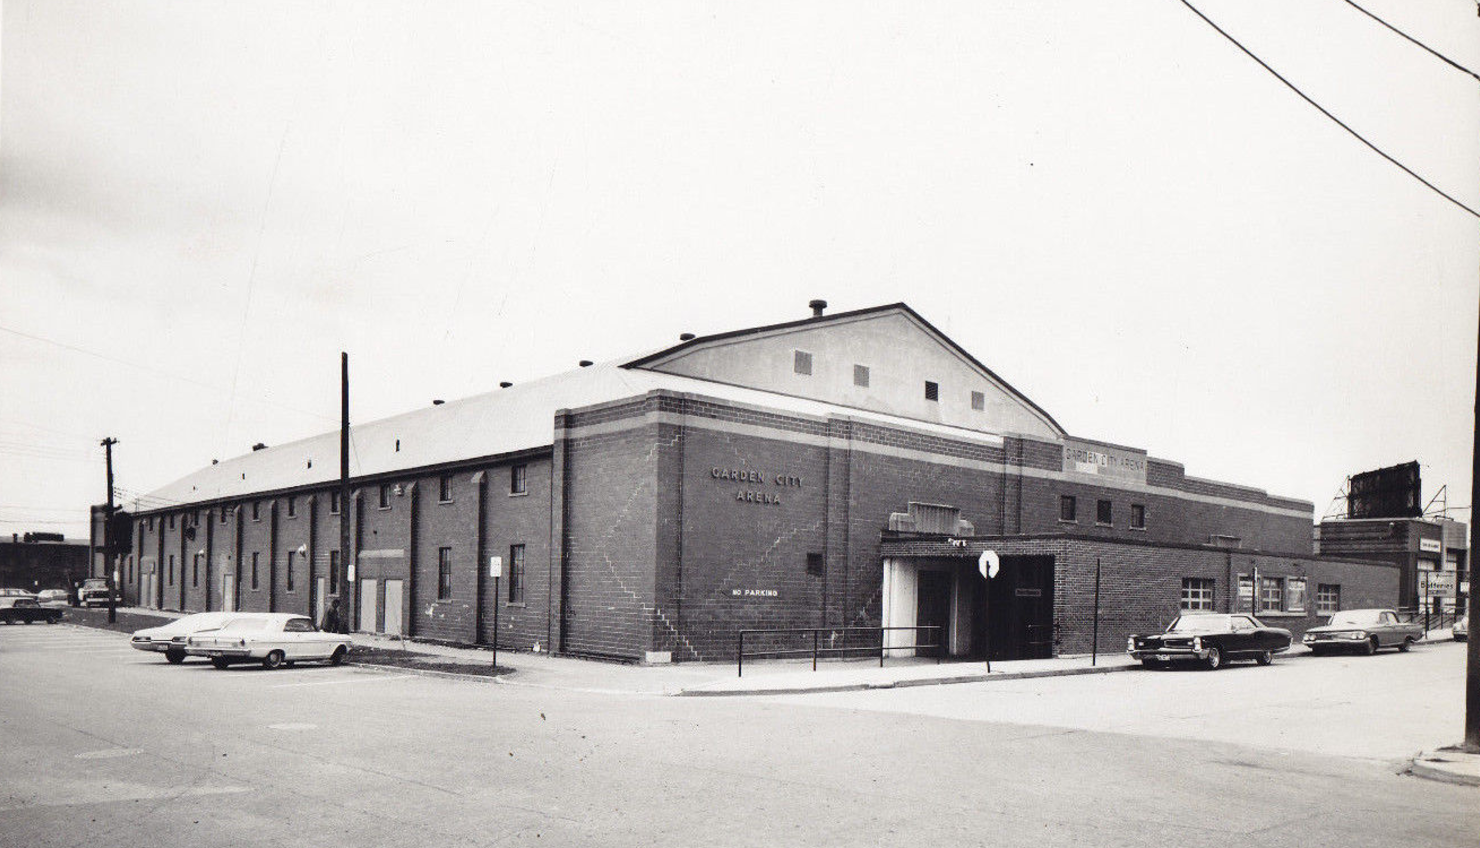 A black and white image of a building.